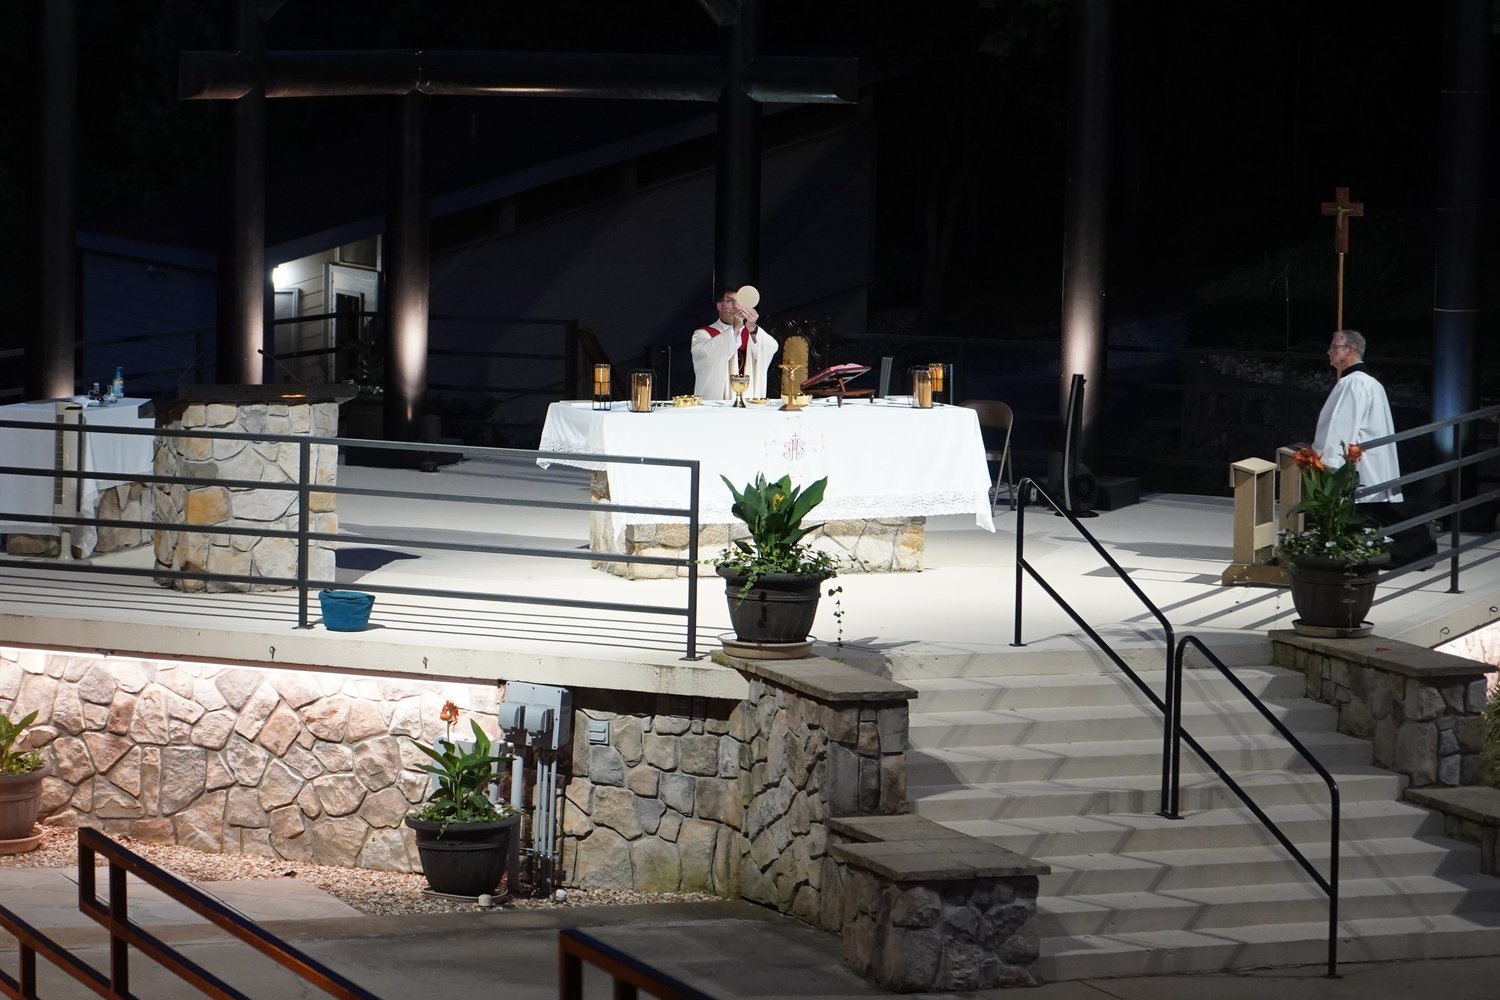 Father John Schmitz, pastor of St. Patrick Parish in Laurie and the Mission of St. Philip Benizi in Versailles, elevates the Most Blessed Sacrament during the Vigil Mass for the Solemnity of the Most Holy Body and Blood of Christ, the evening of June 18 at the outdoor altar of the National Shrine of Mary, Mother of the Church, in Laurie.